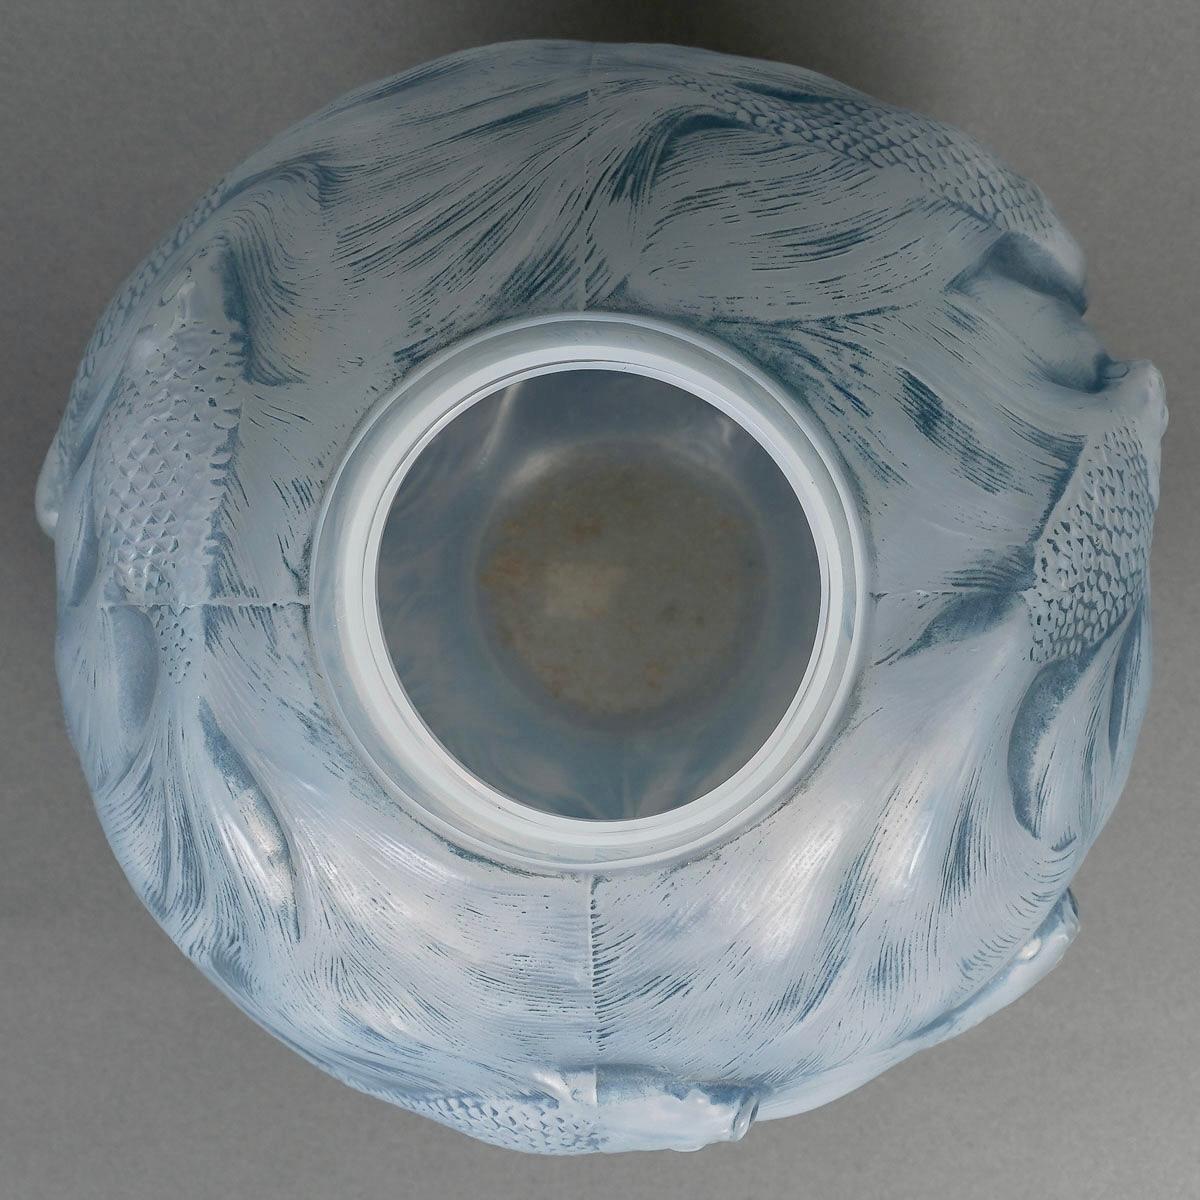 French 1924 Rene Lalique Vase Formose Cased Opalescent Glass with Blue Patina